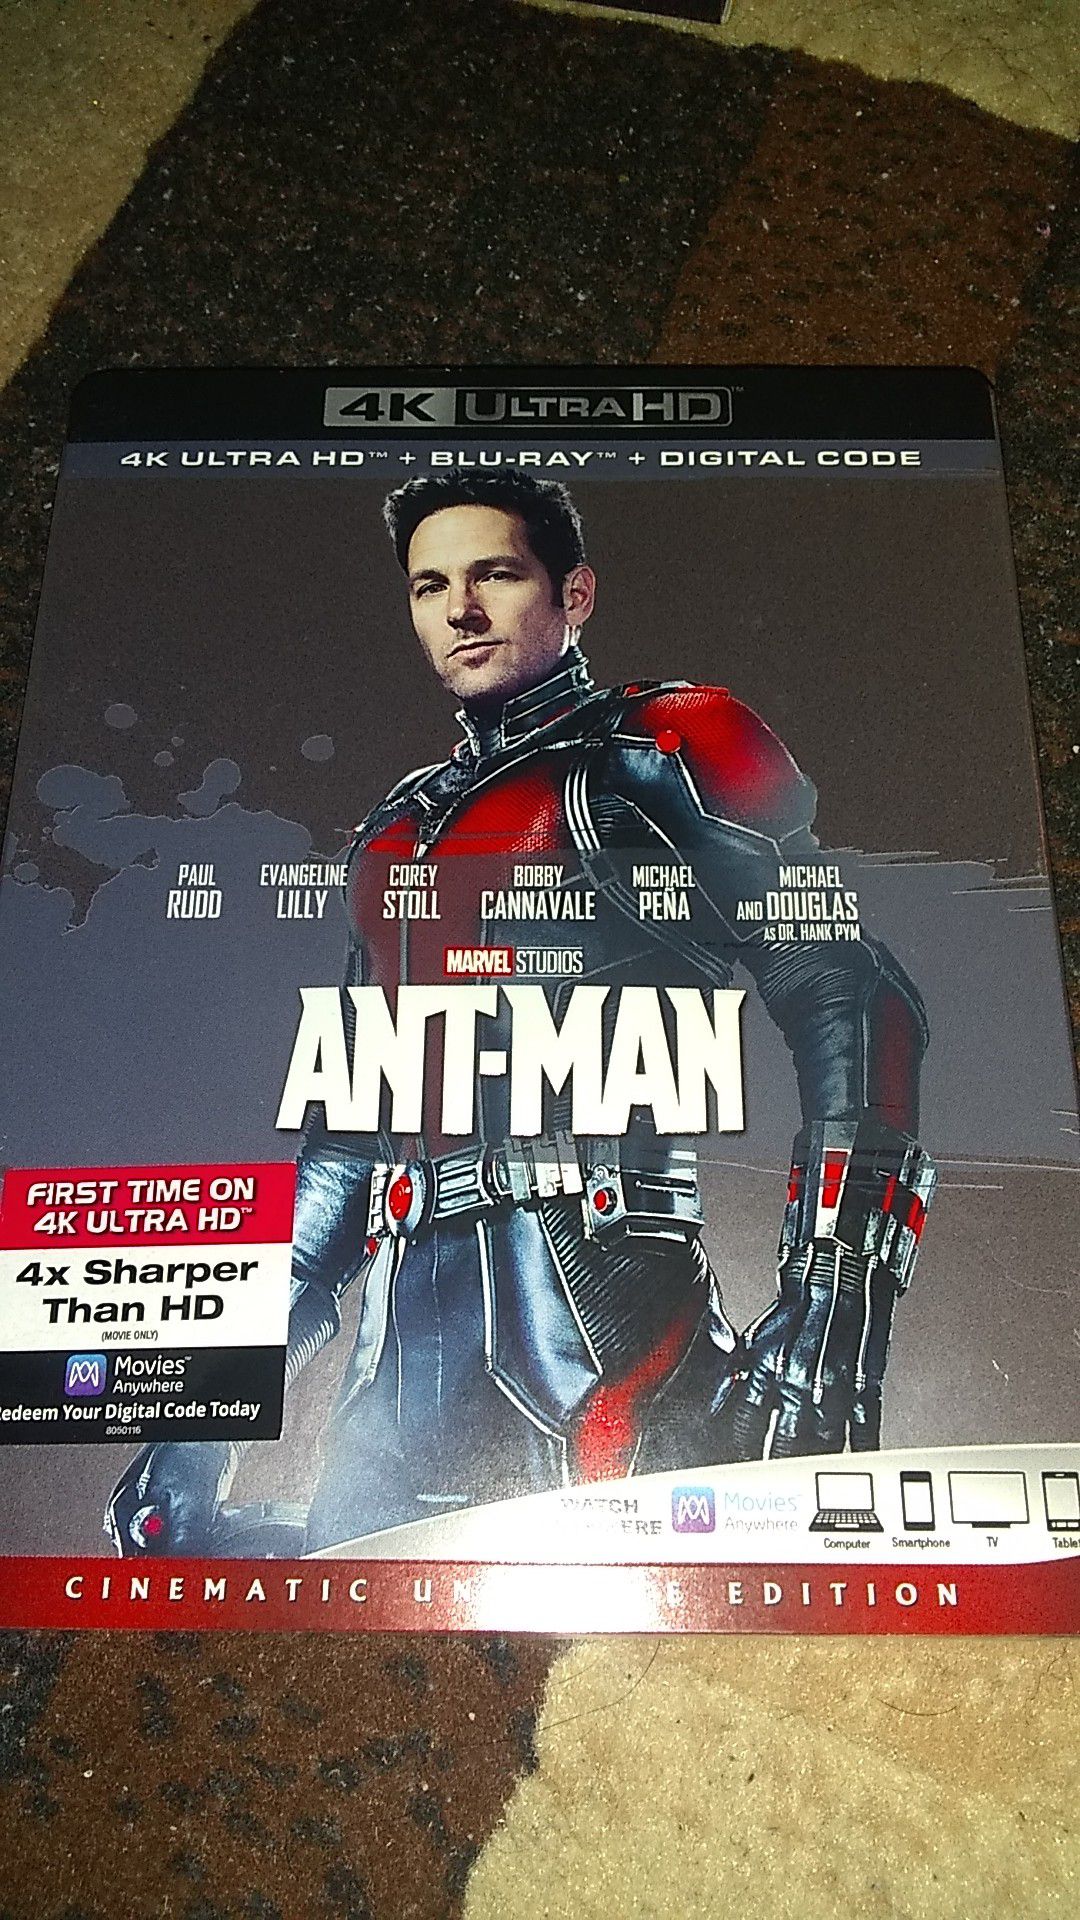 BRAND NEW SEALED NEVER OPENED 4K ANTMAN MOVIE ASKING ONLY FOR $14.00